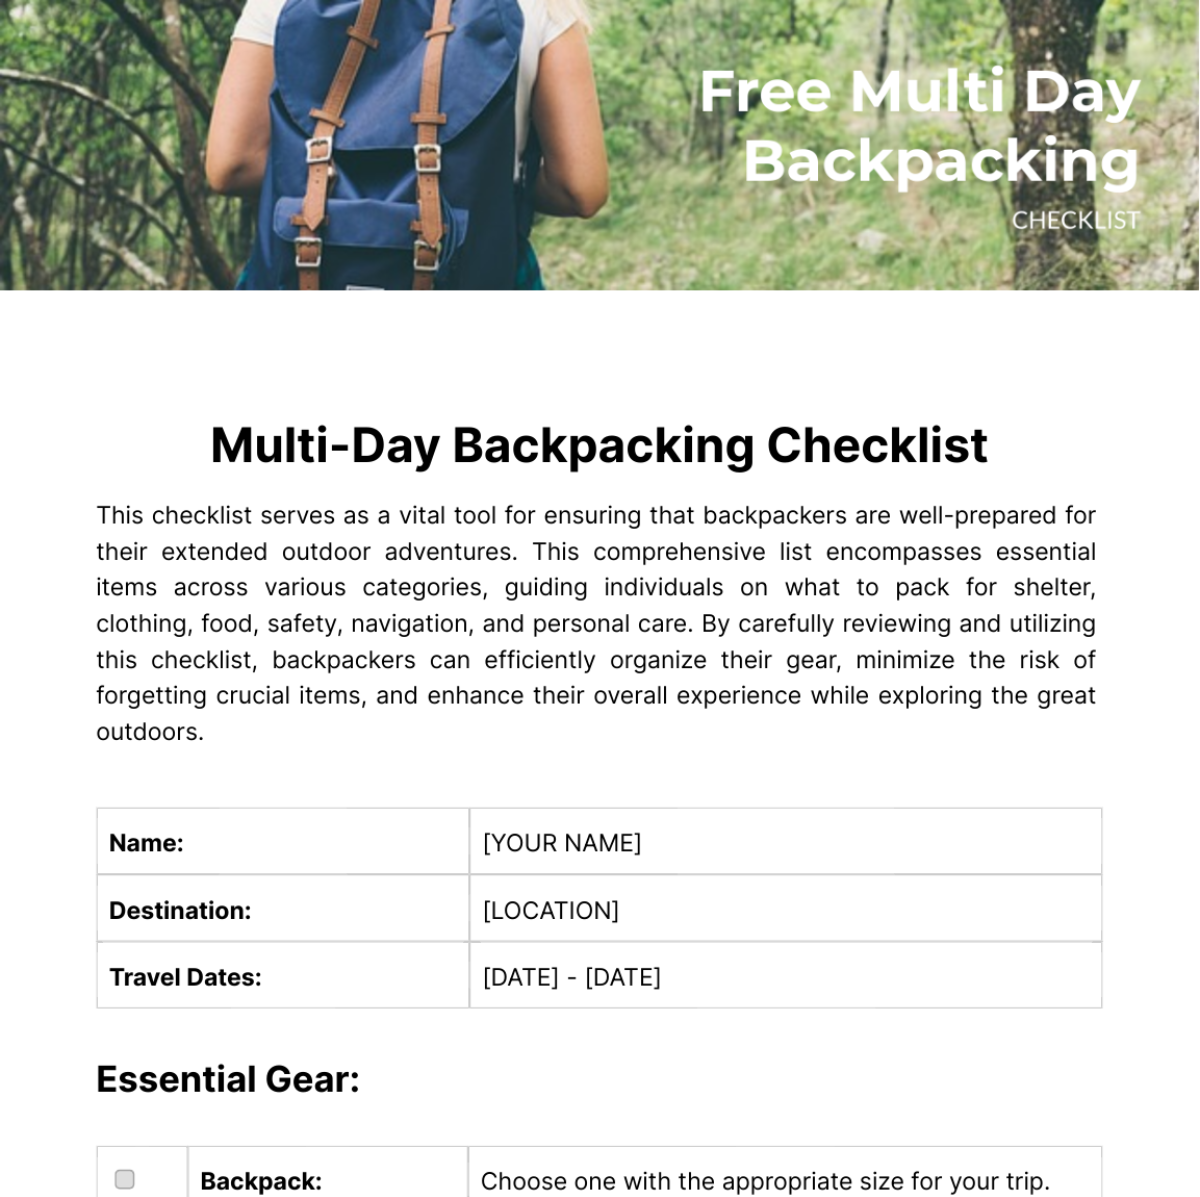 Free Multi Day Backpacking Checklist Template